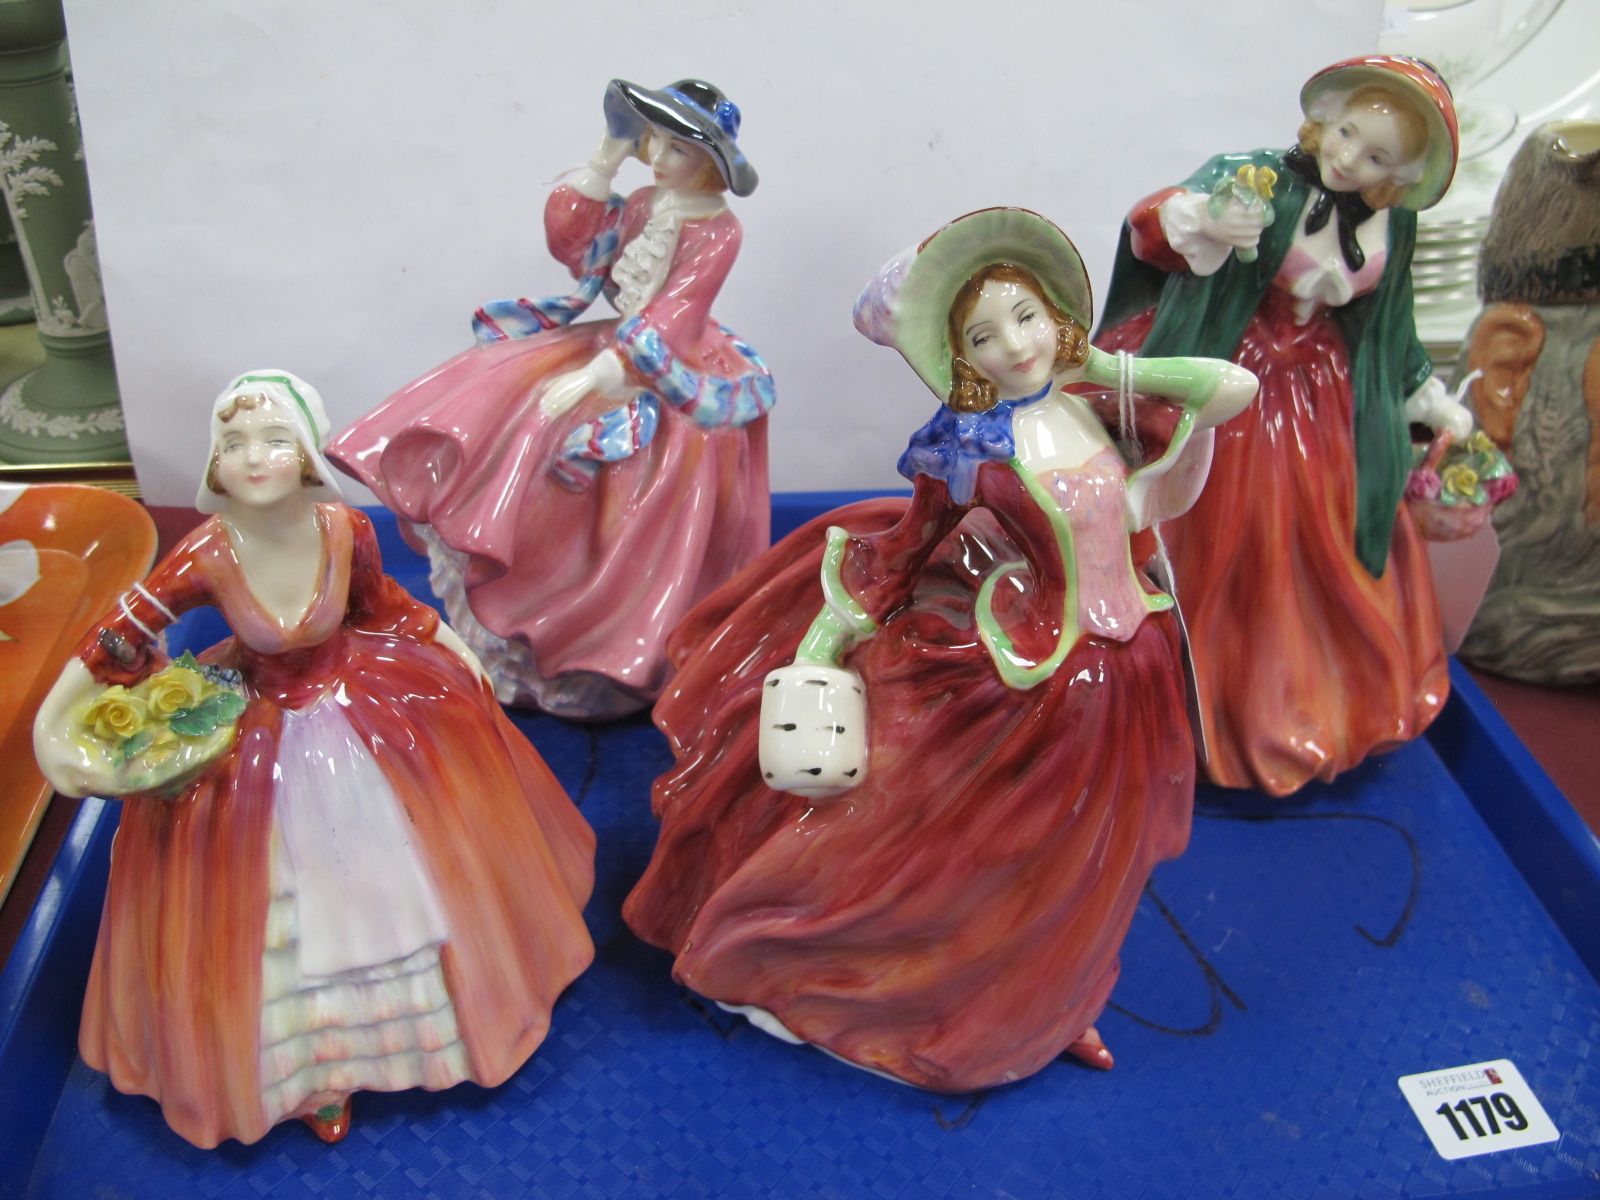 Royal Doulton Figurines, 'Lady Charmian', 'Janet', 'Autumn Breezes', Top O' the Hill'. (4)